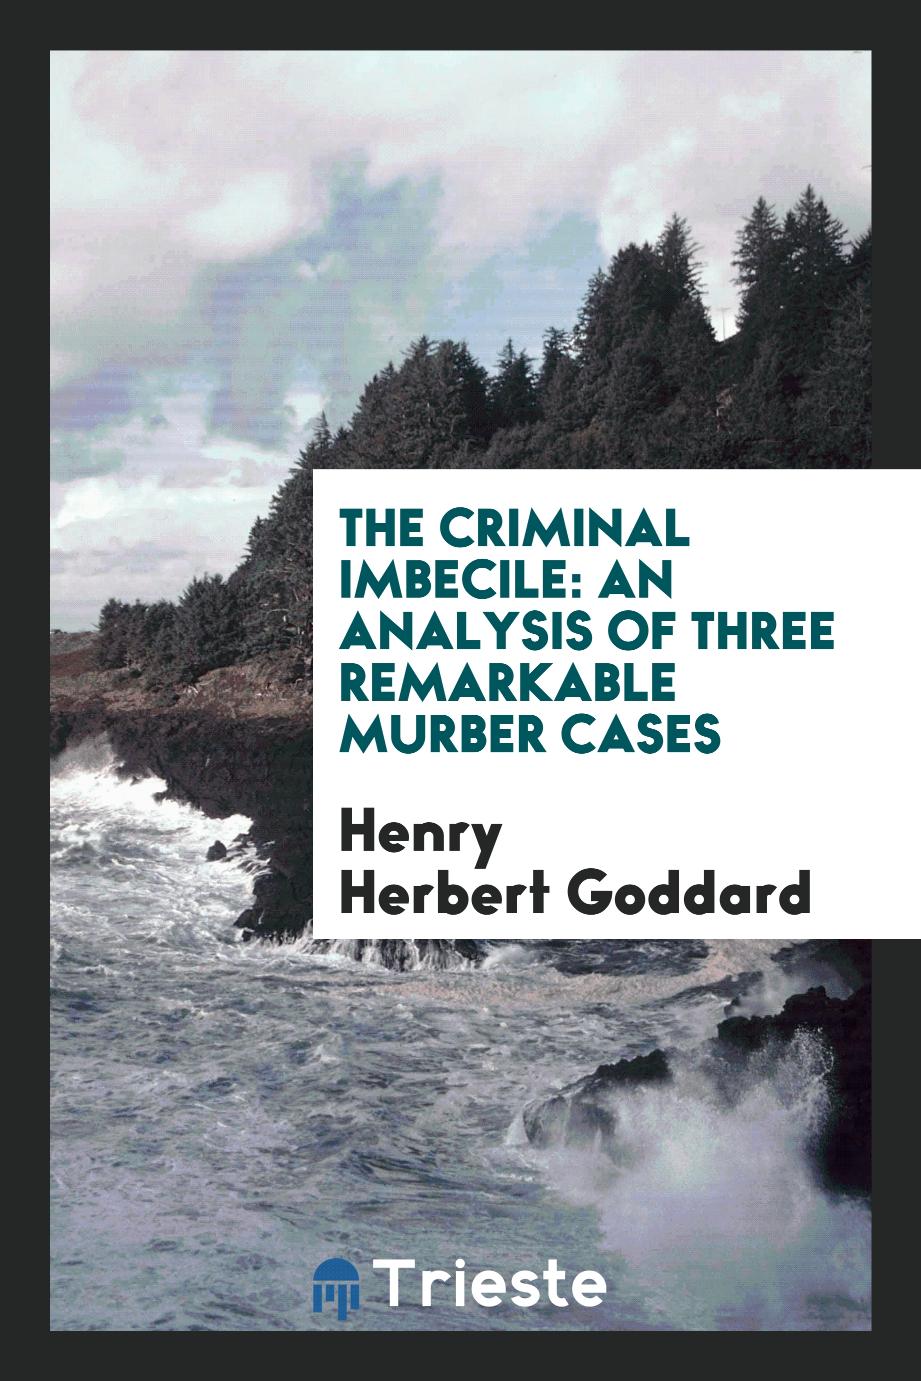 The Criminal Imbecile: An Analysis of Three Remarkable Murber Cases